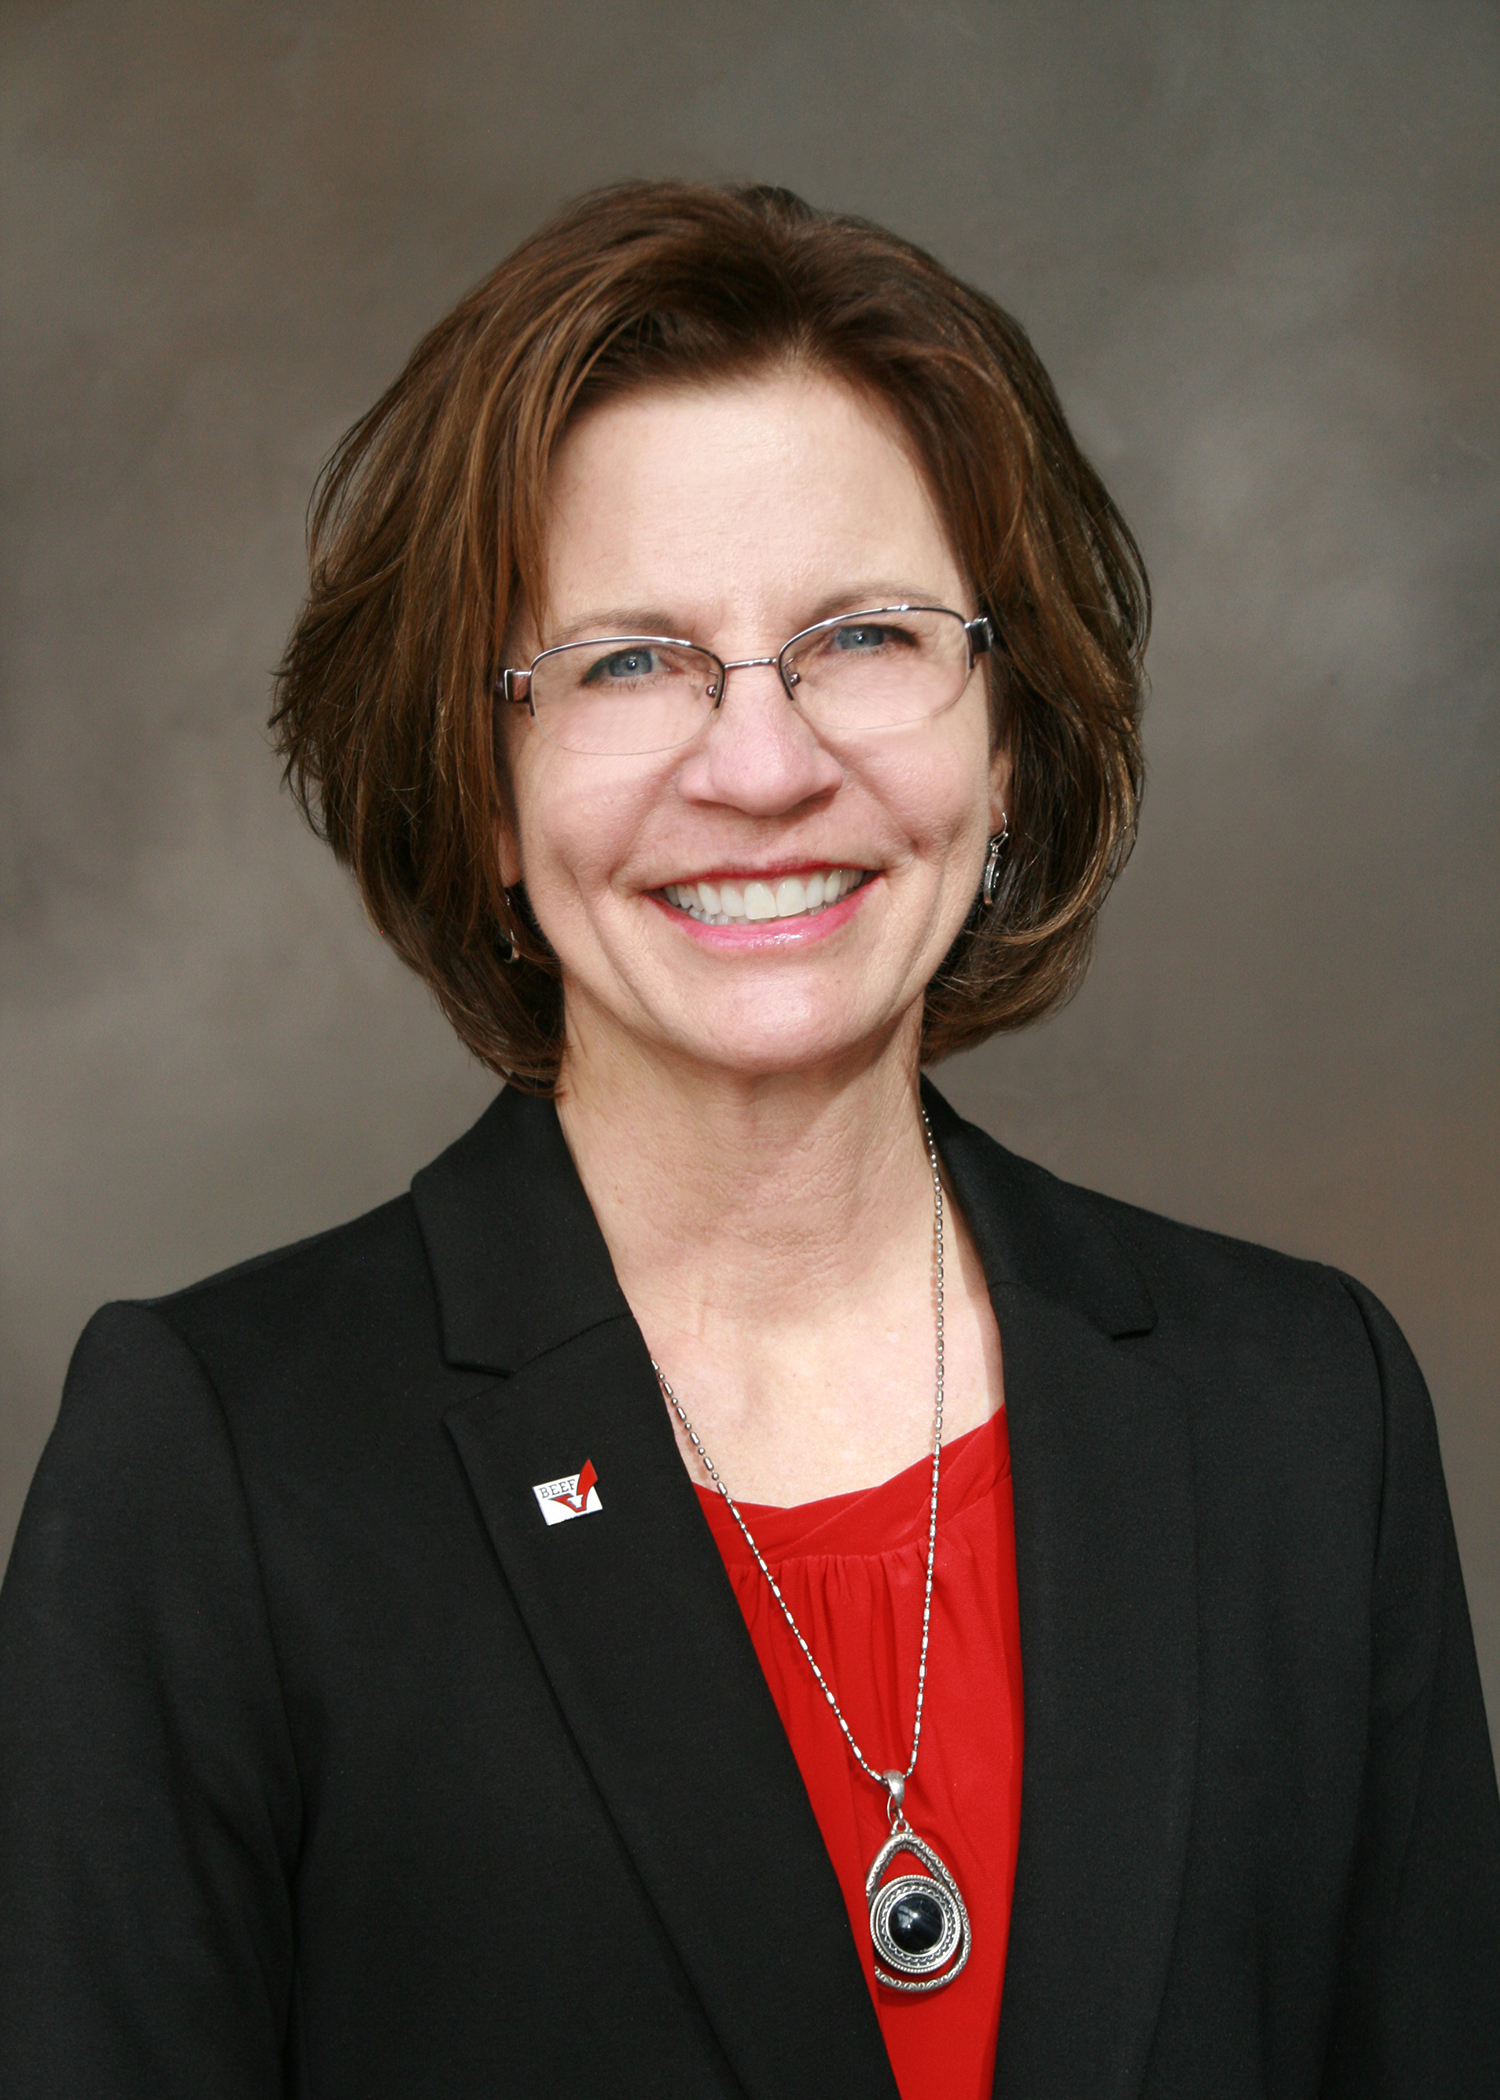 Joan Ruskamp, NCTA alumna and an agricultural producer from Dodge, Nebraska, will deliver the commencement message at NCTA on May 2. (Courtesy photo)